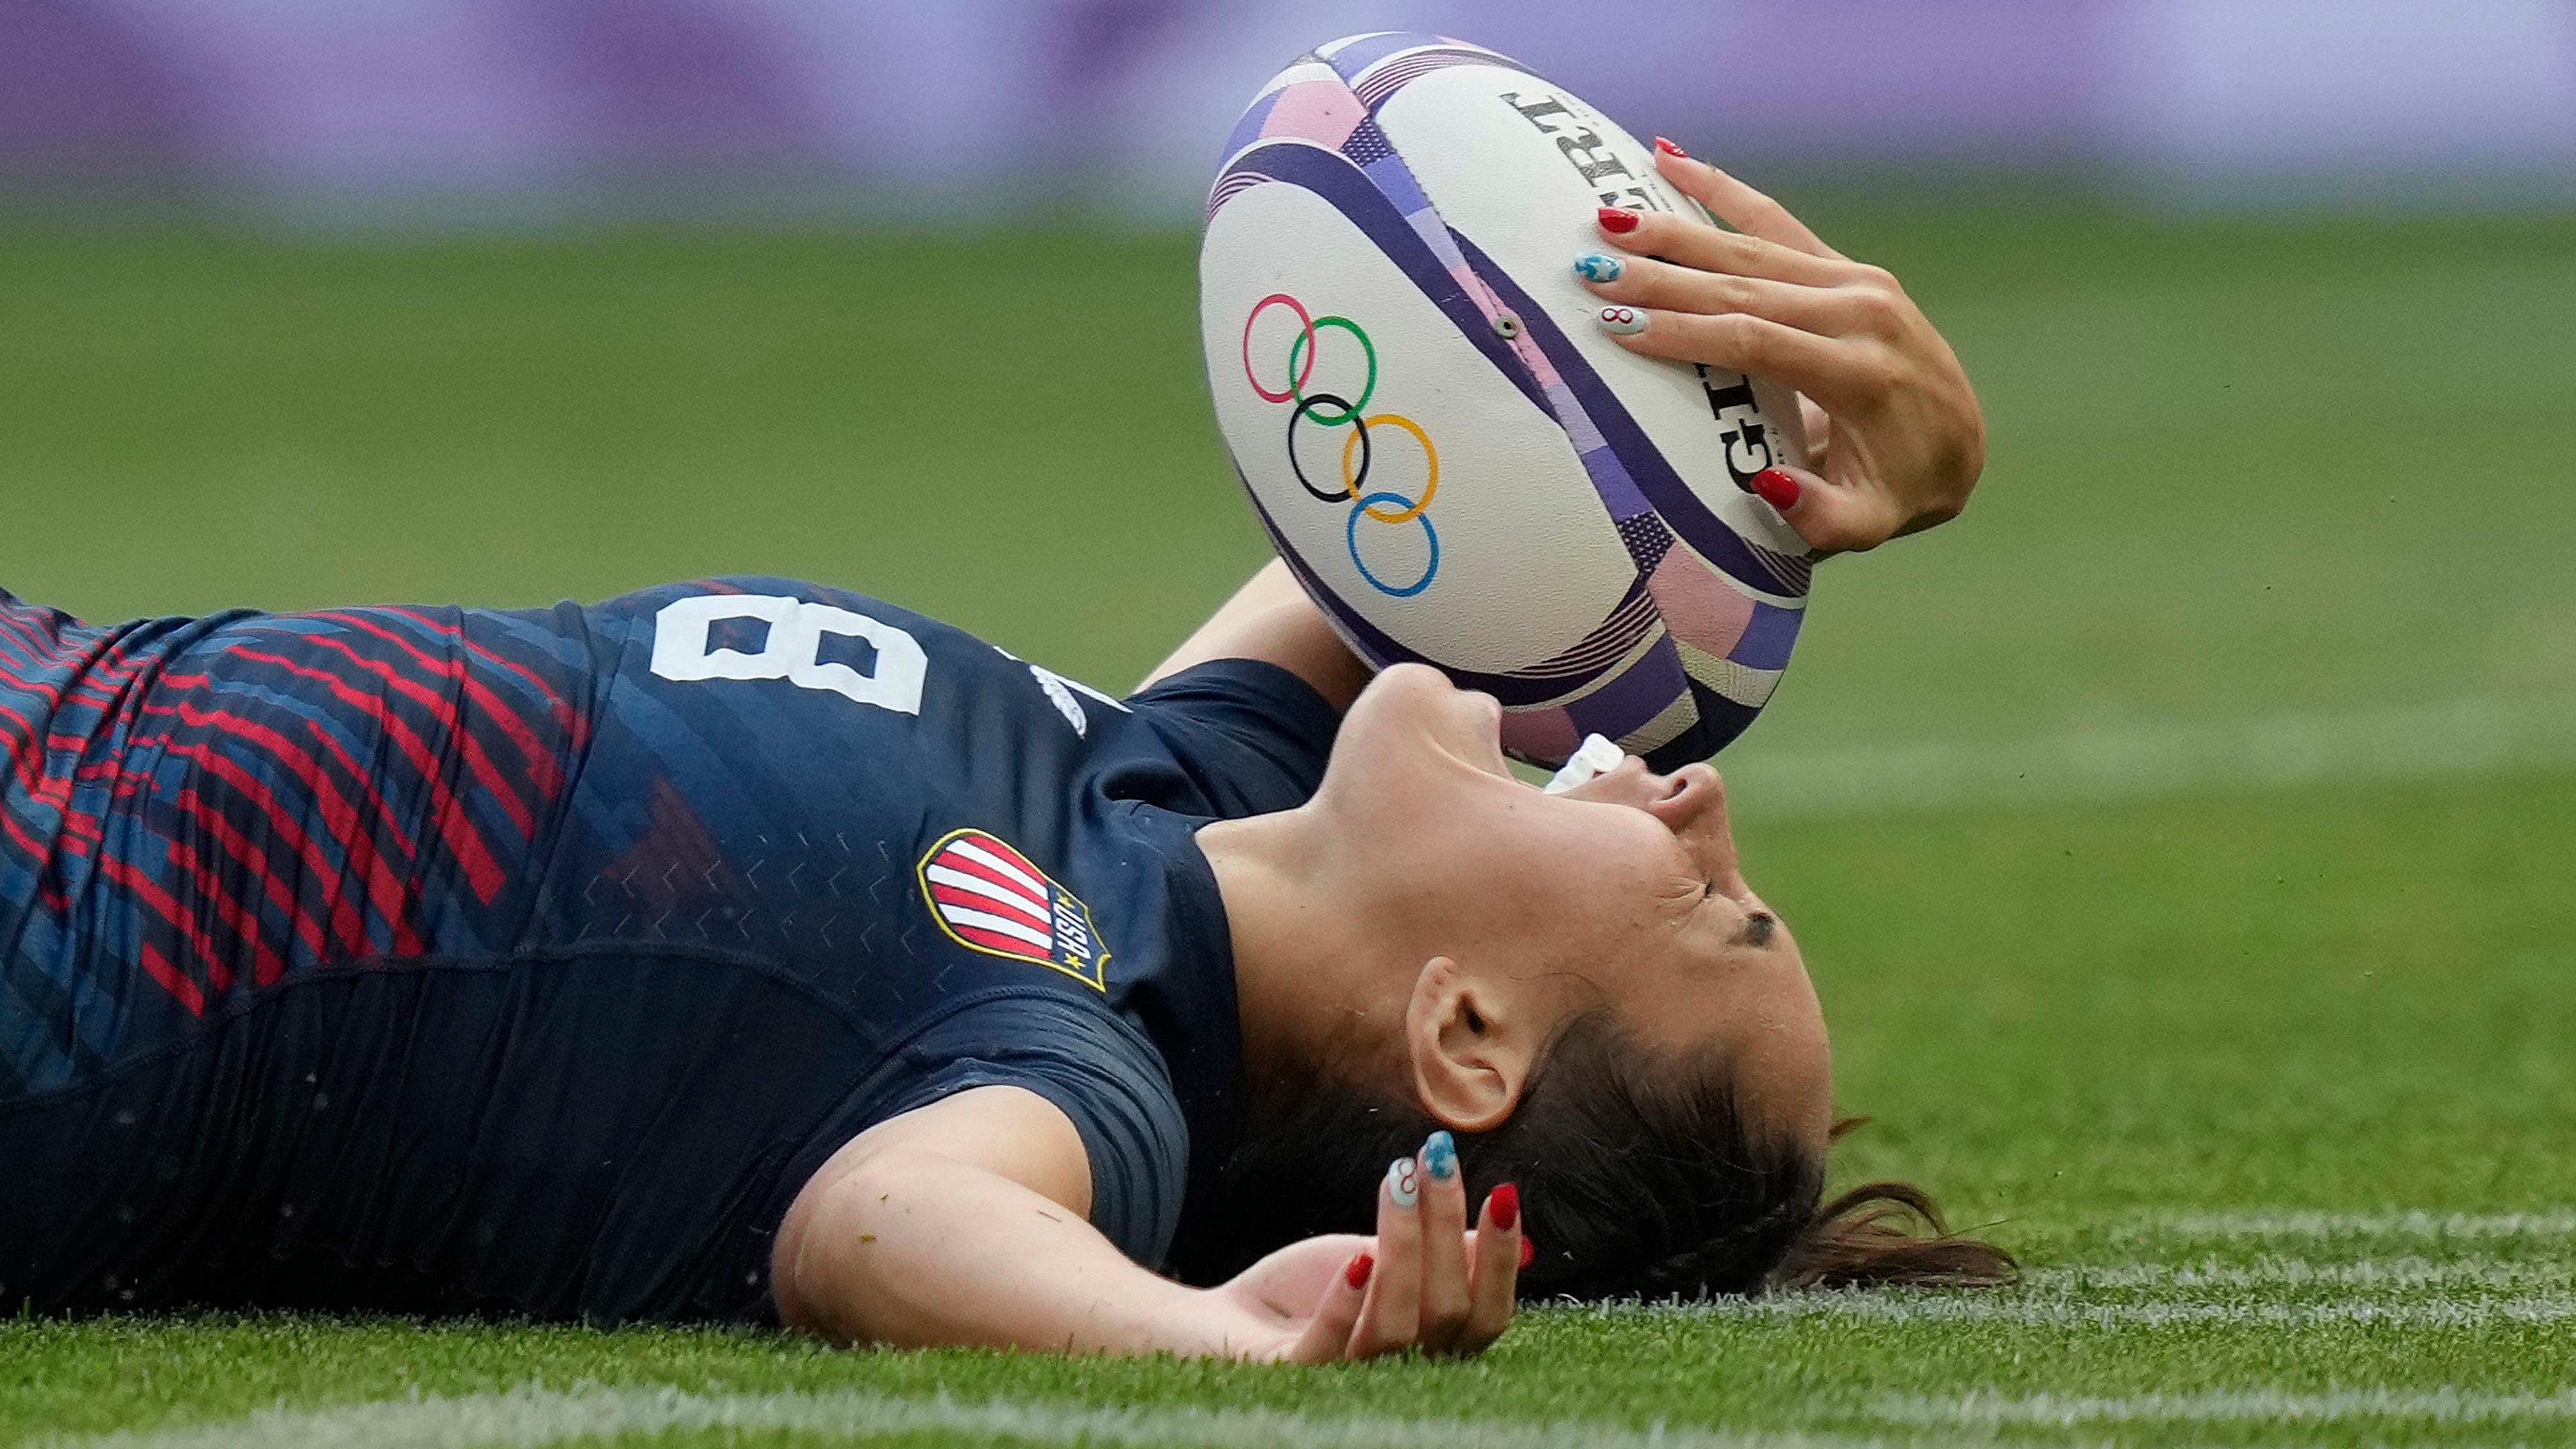 U.S. rugby player collapses on the grass, ball in hand, screaming in excitement after scoring the winning try during the women's bronze medal match.